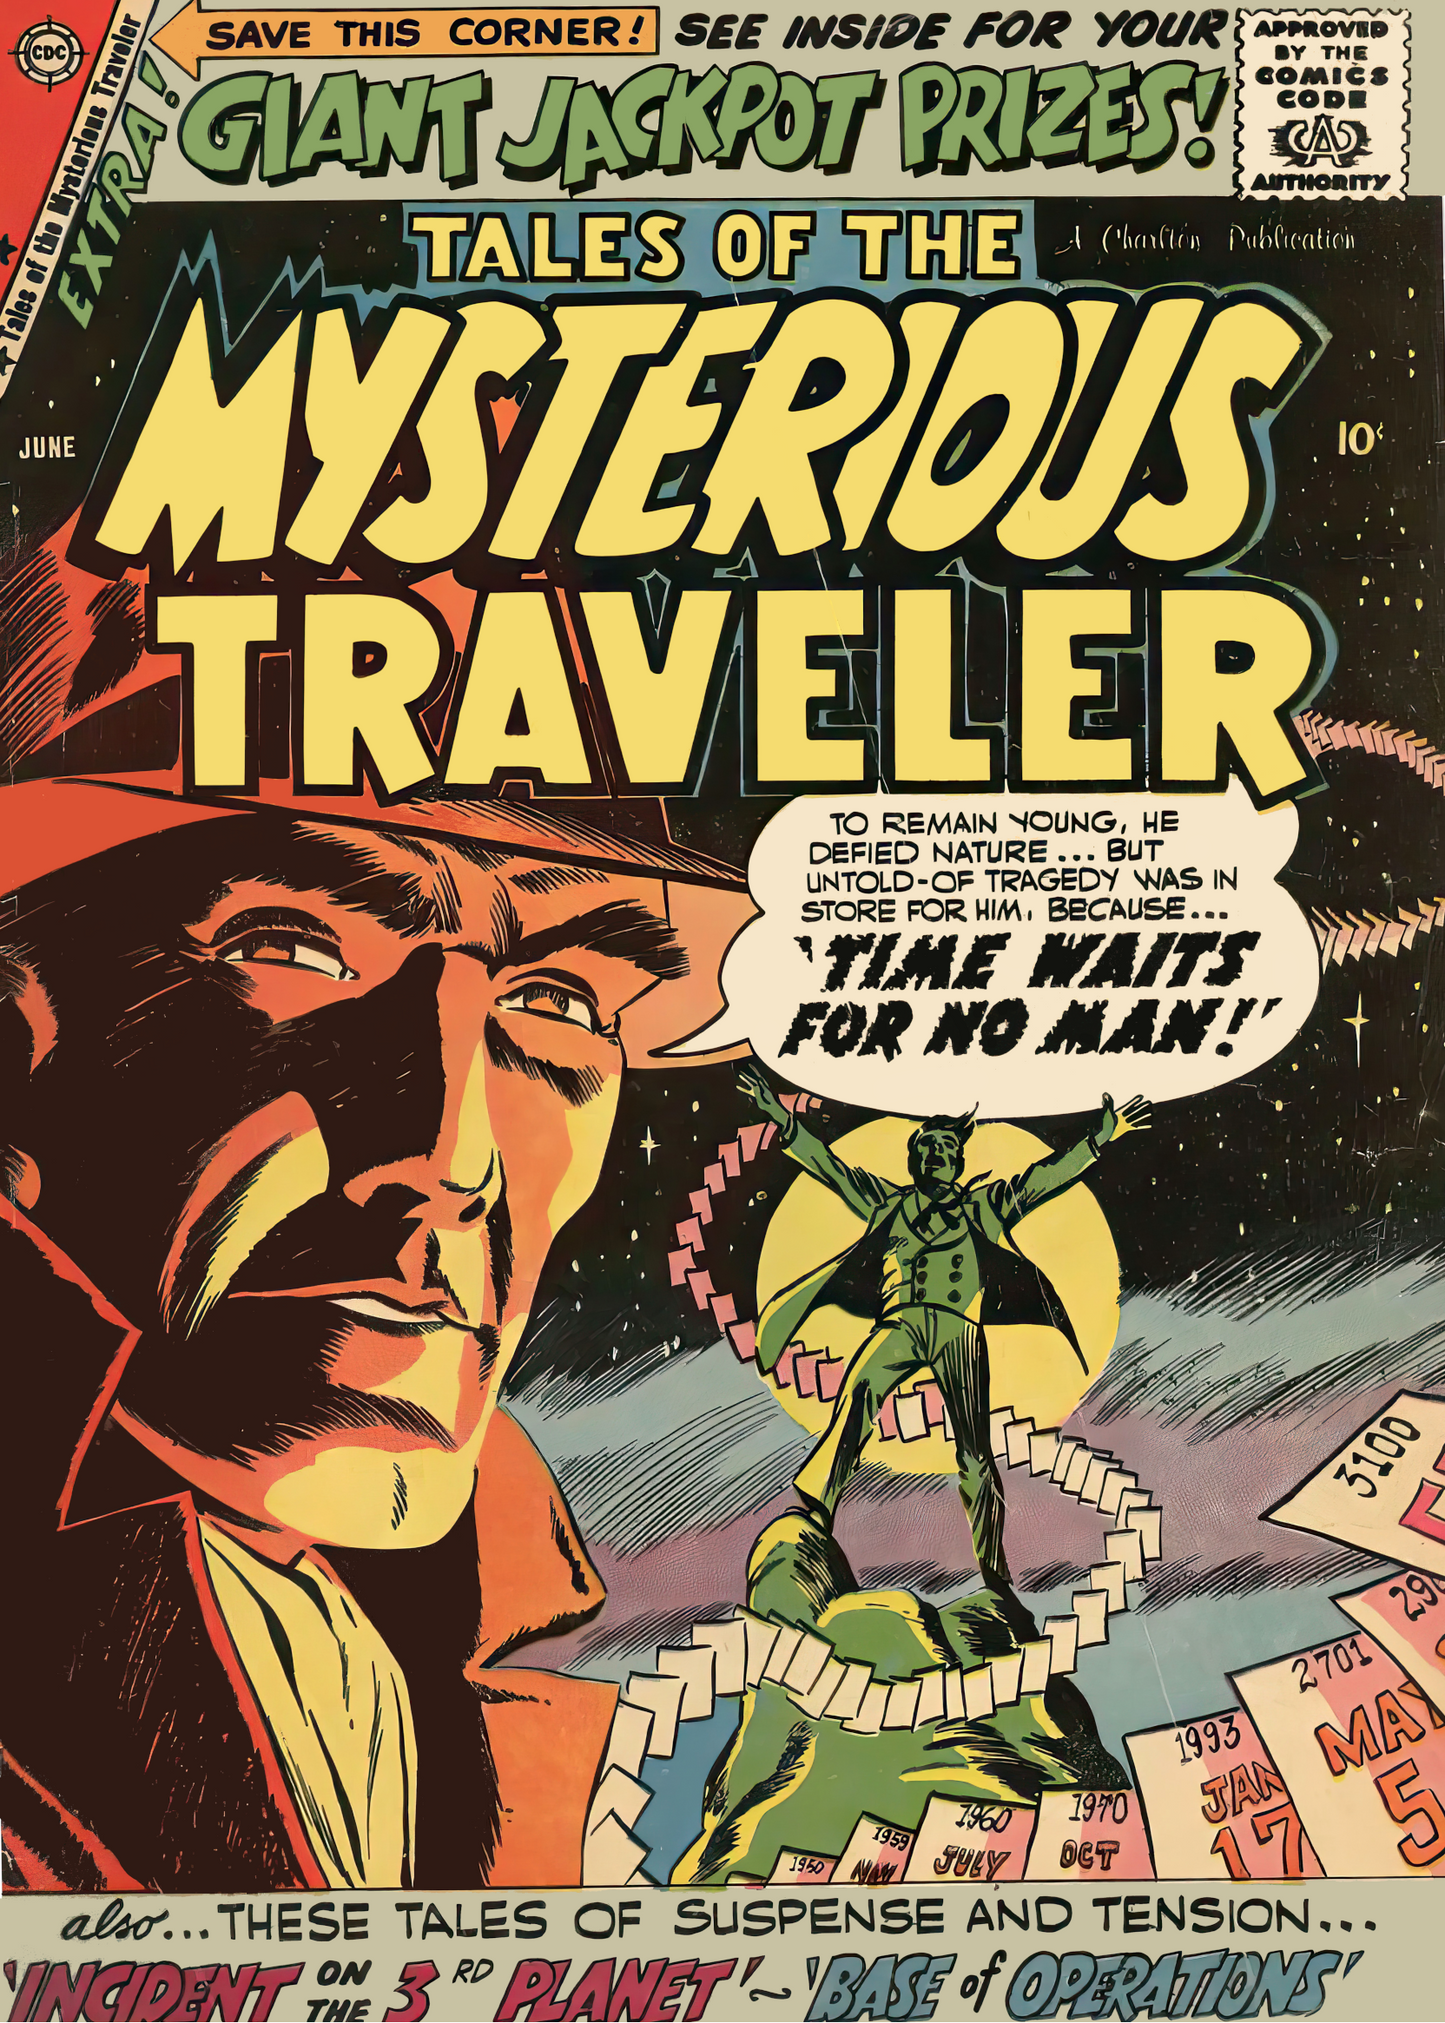 #1043 Tales of the mysterious traveler